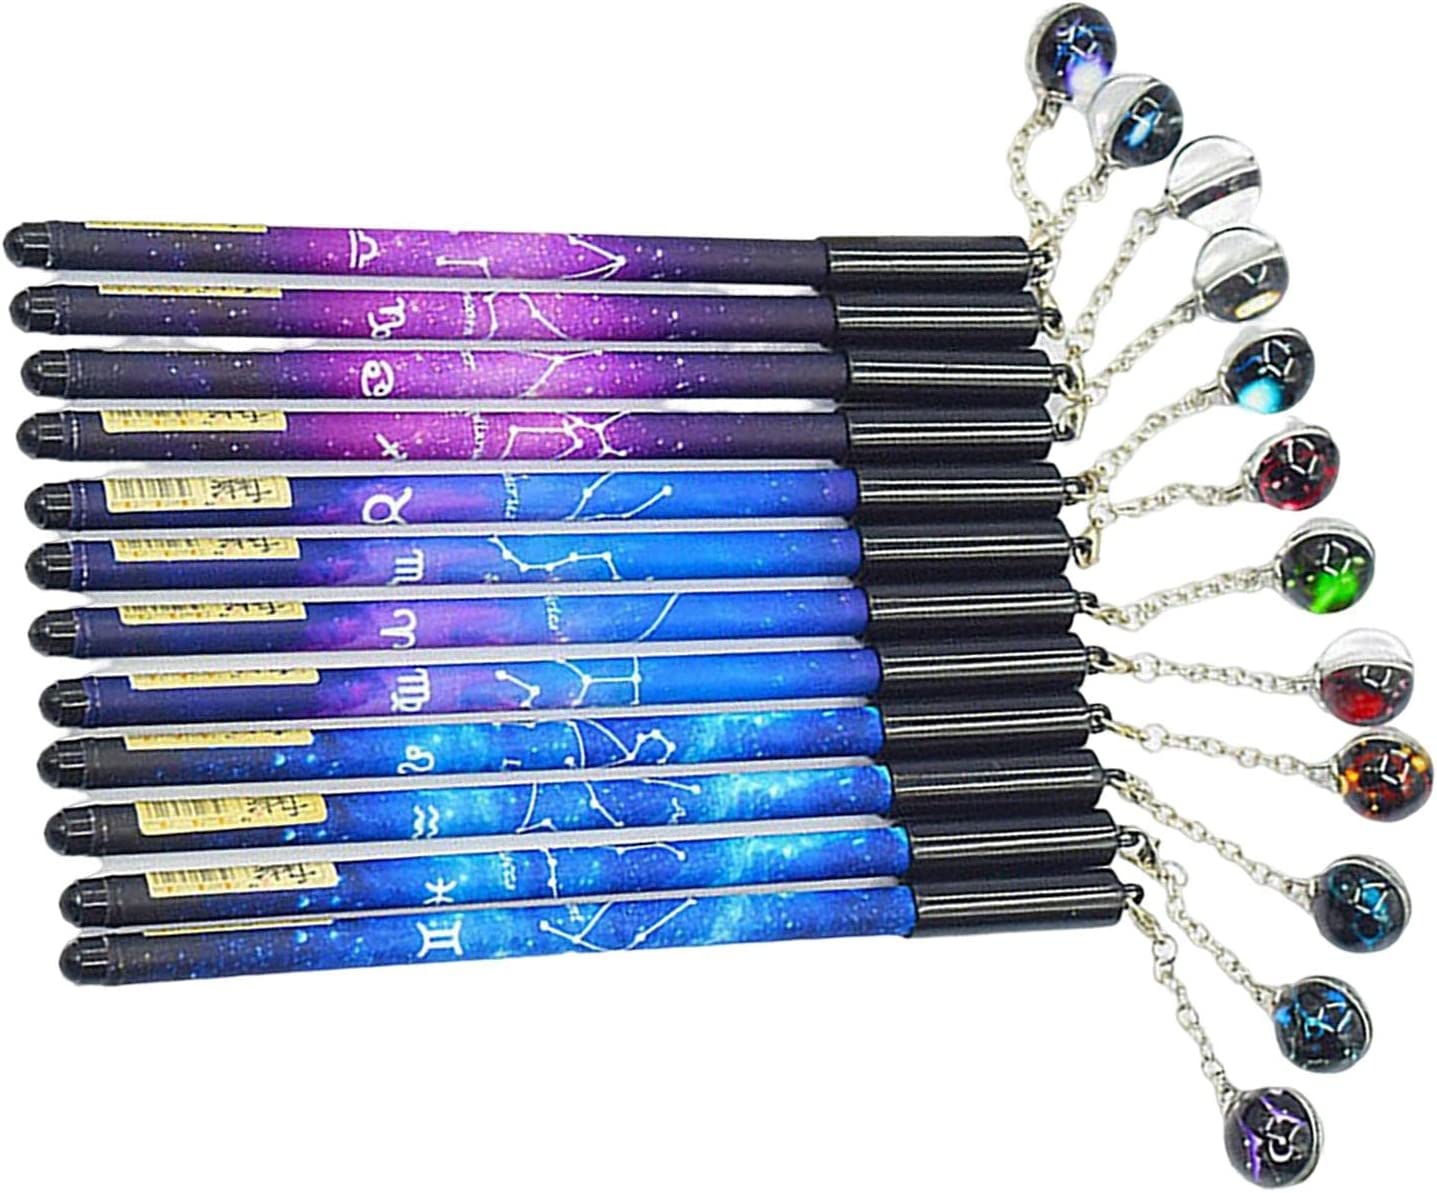 12 Pieces Constellation Gel Pens 0.5 mm Smooth Tip Pendant Writing Pen for Office Students Stationery Supplies